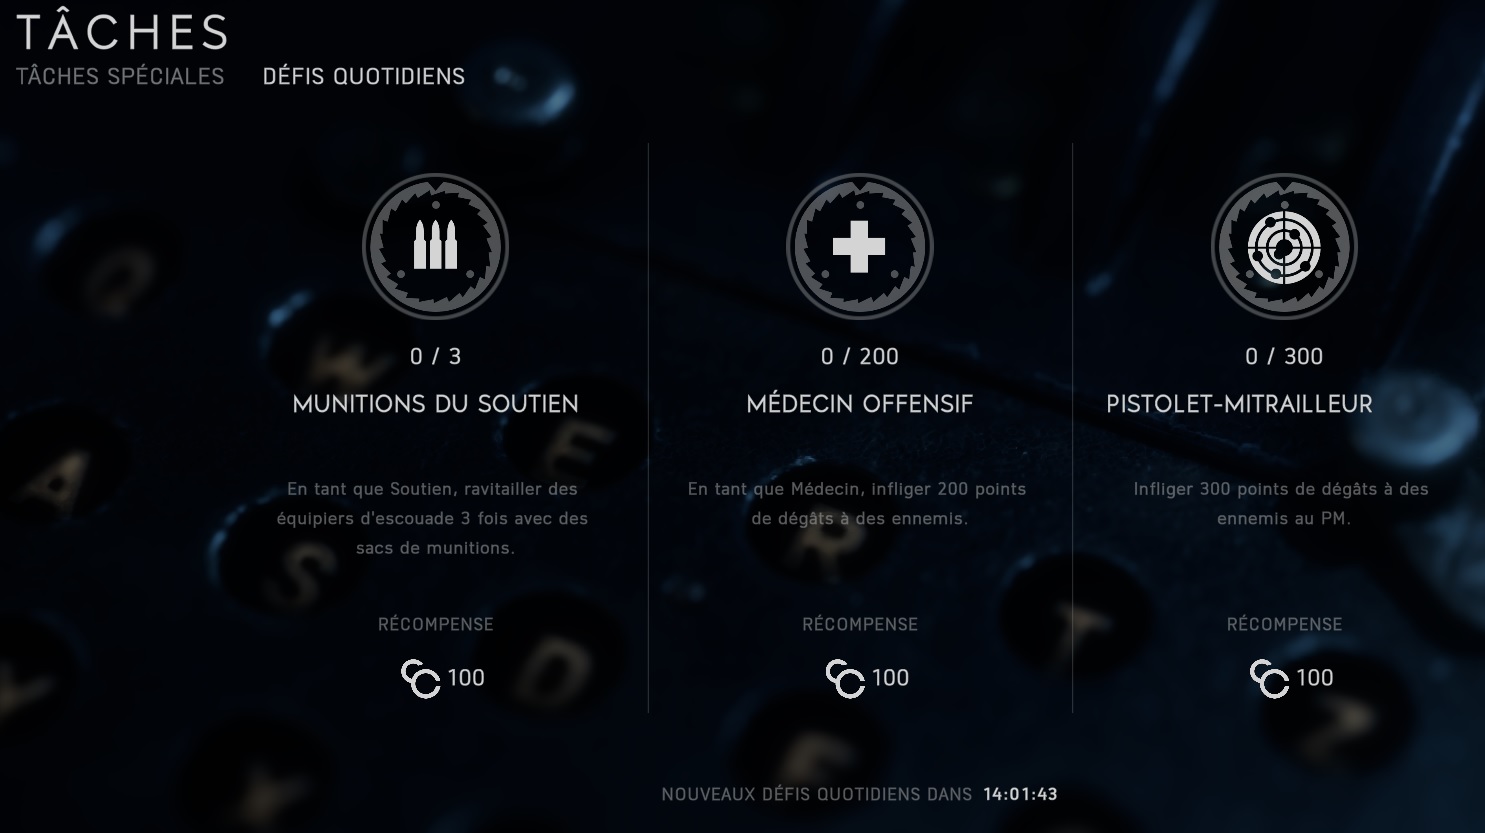 bfv-battlefield-5-credits-cc-piece-compagnie-gagner-comment-skin-arme